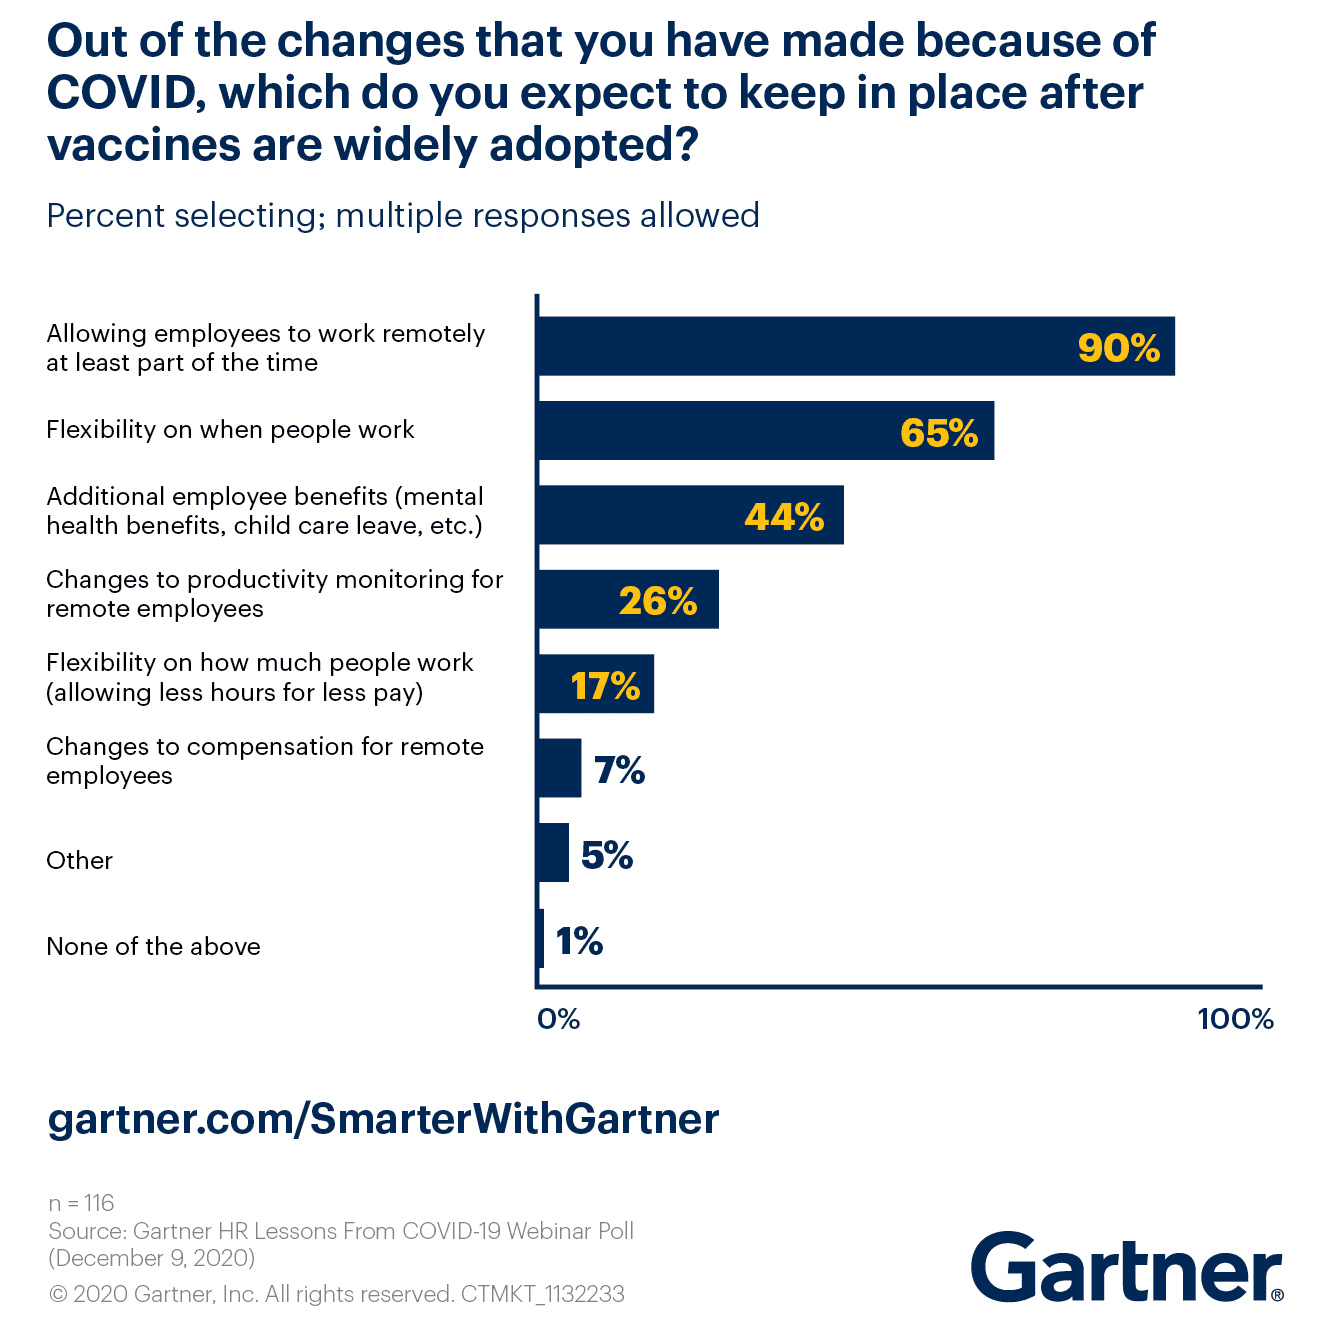 Employer preferences for working remotely after COVID-19 (Gartner)